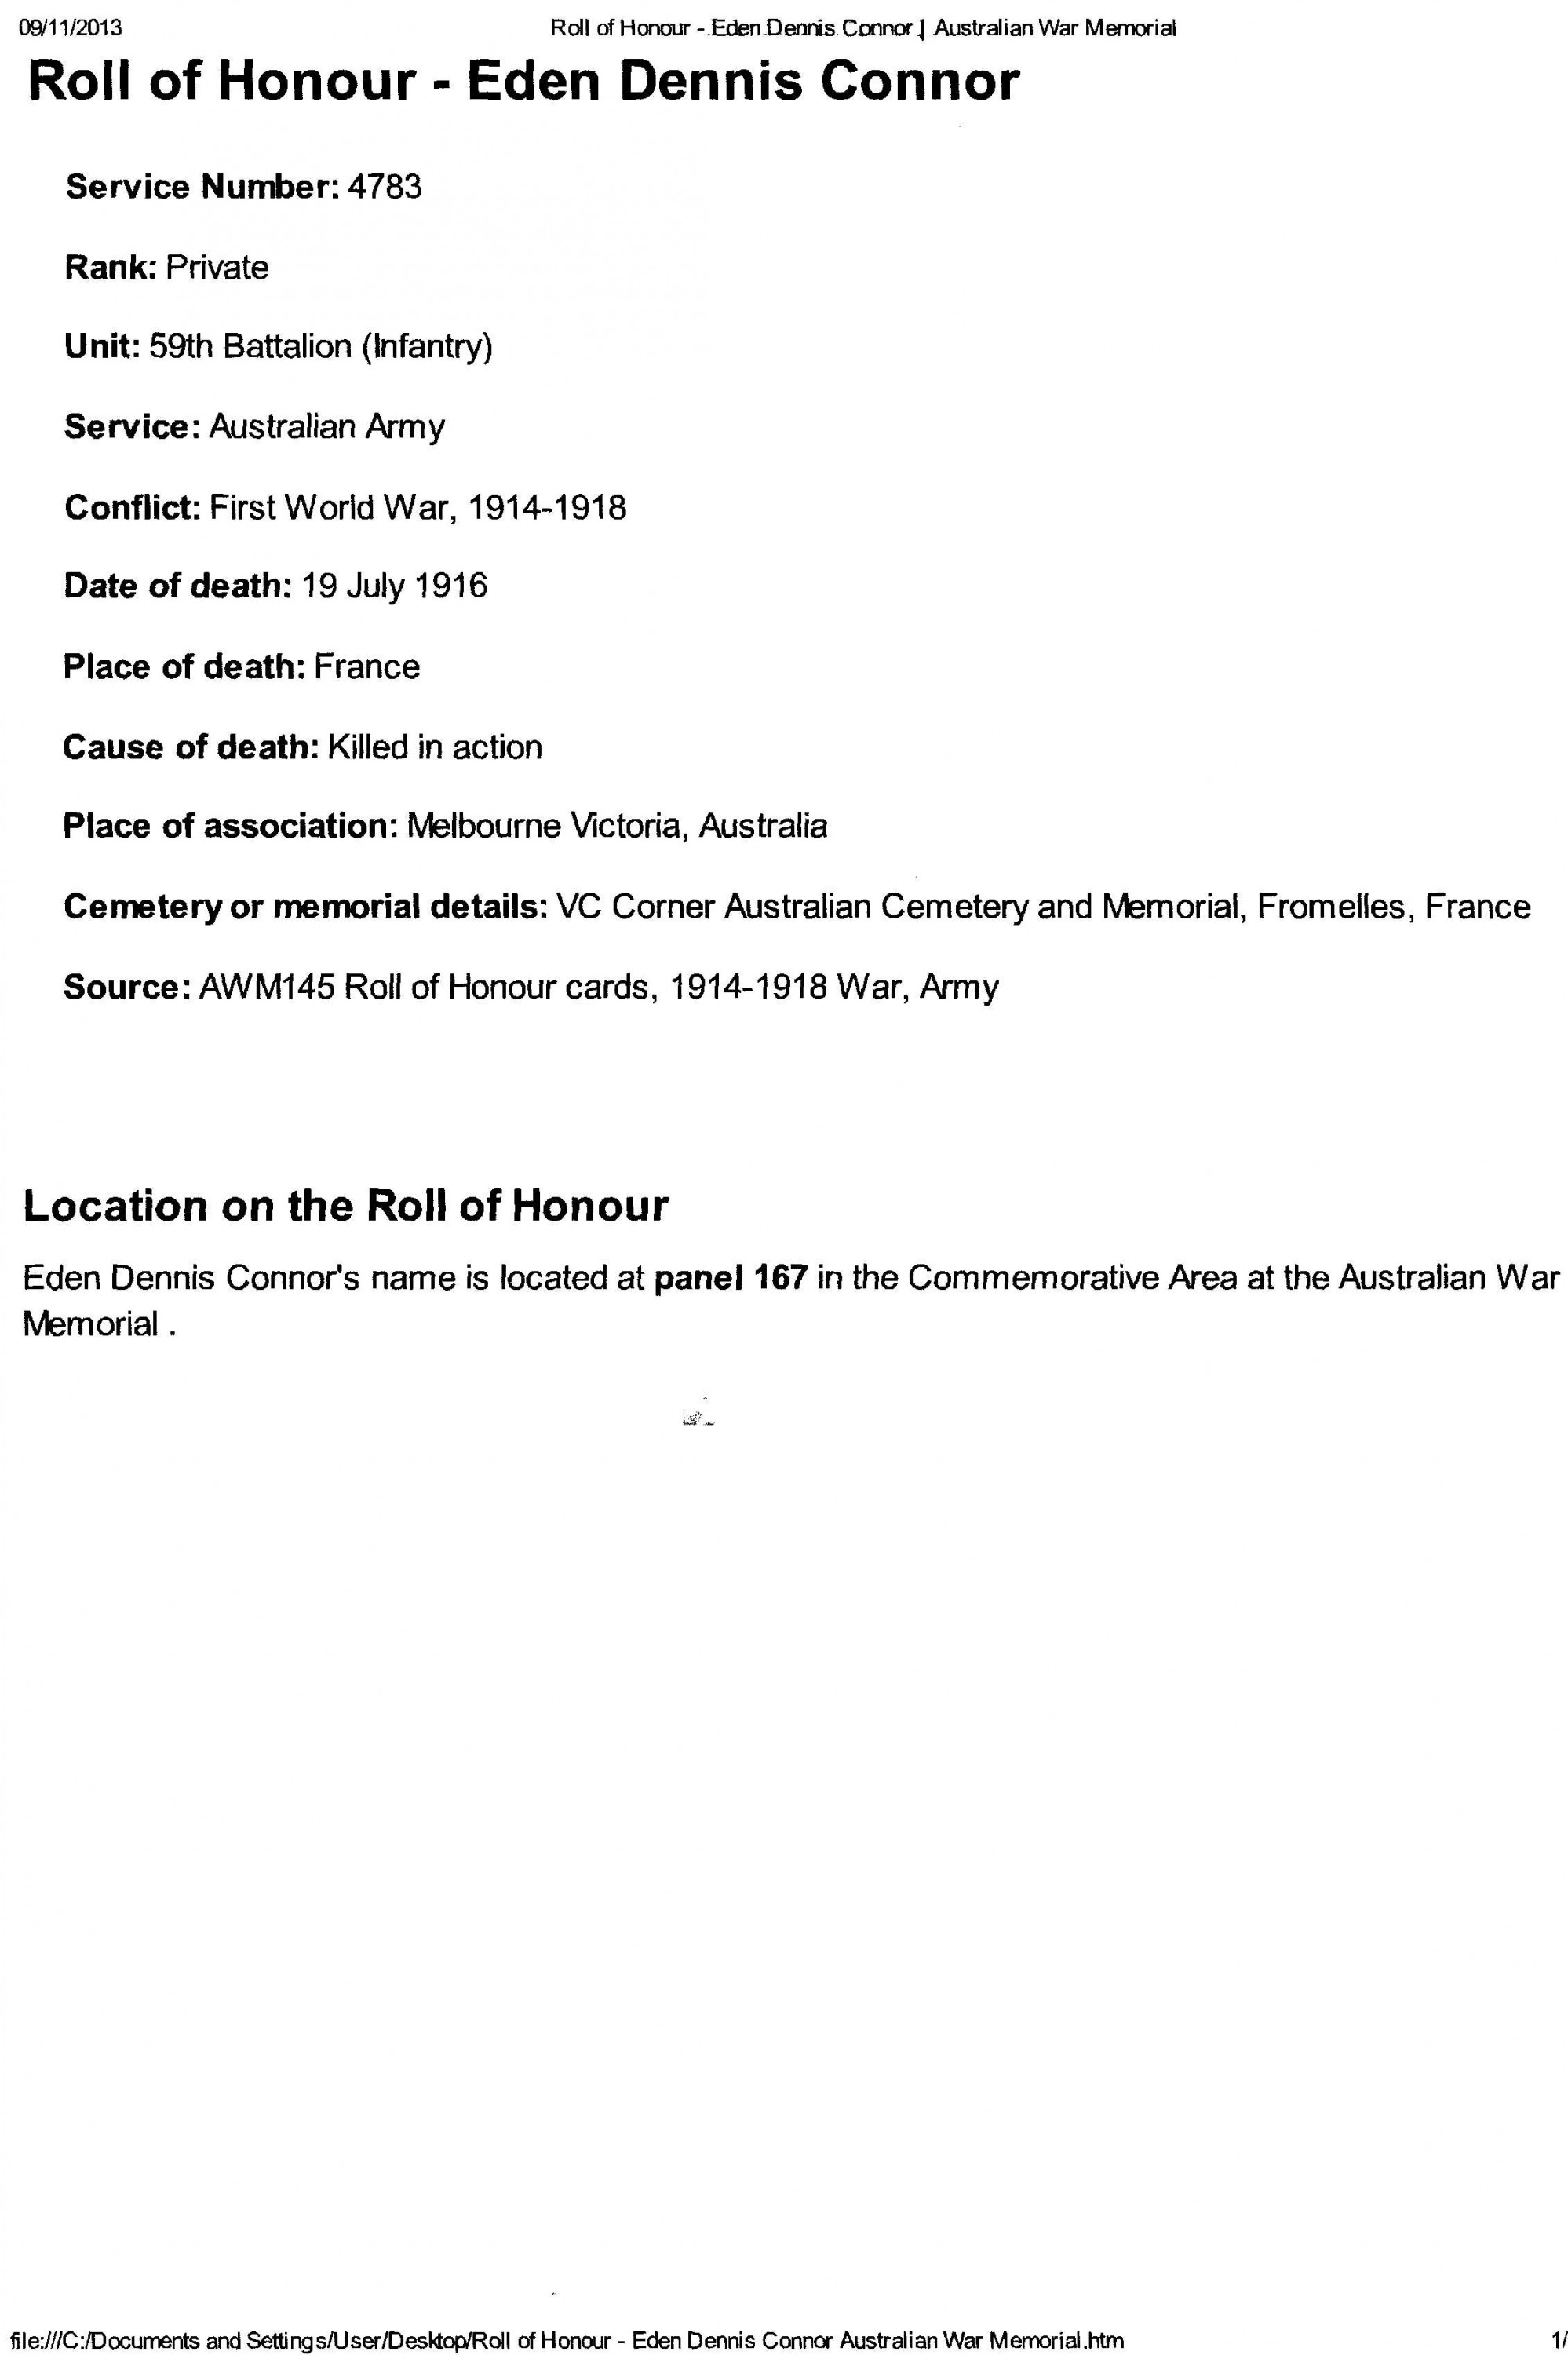 Roll of Honour in AWM Canberra  Eden Dennis Connor